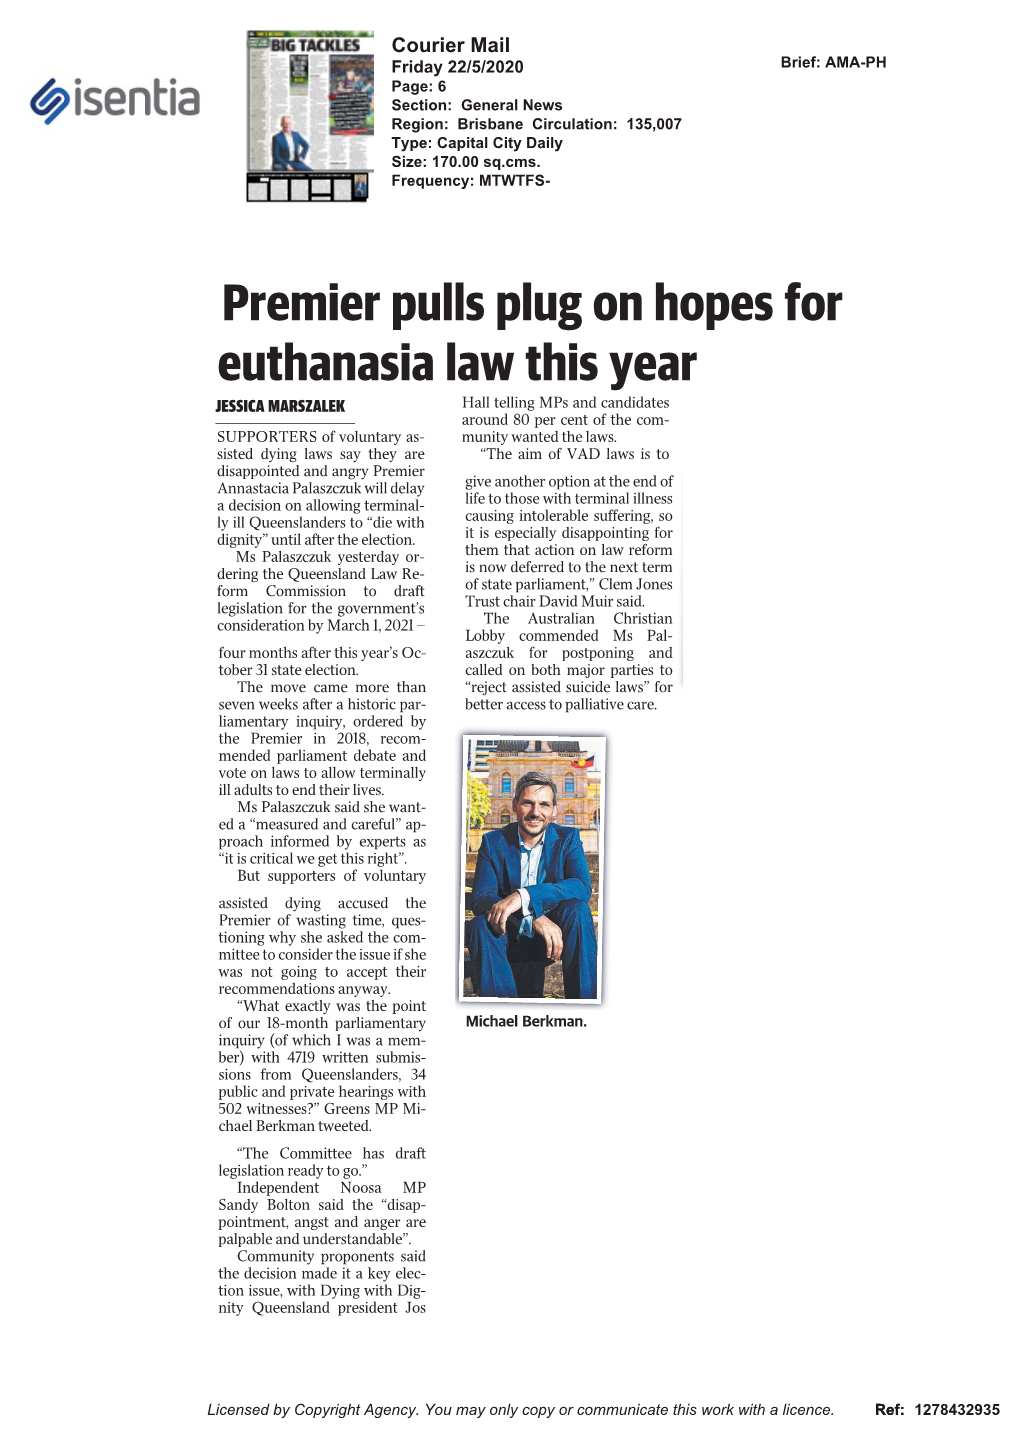 Premier Pulls Plug on Hopes for Euthanasia Law This Year